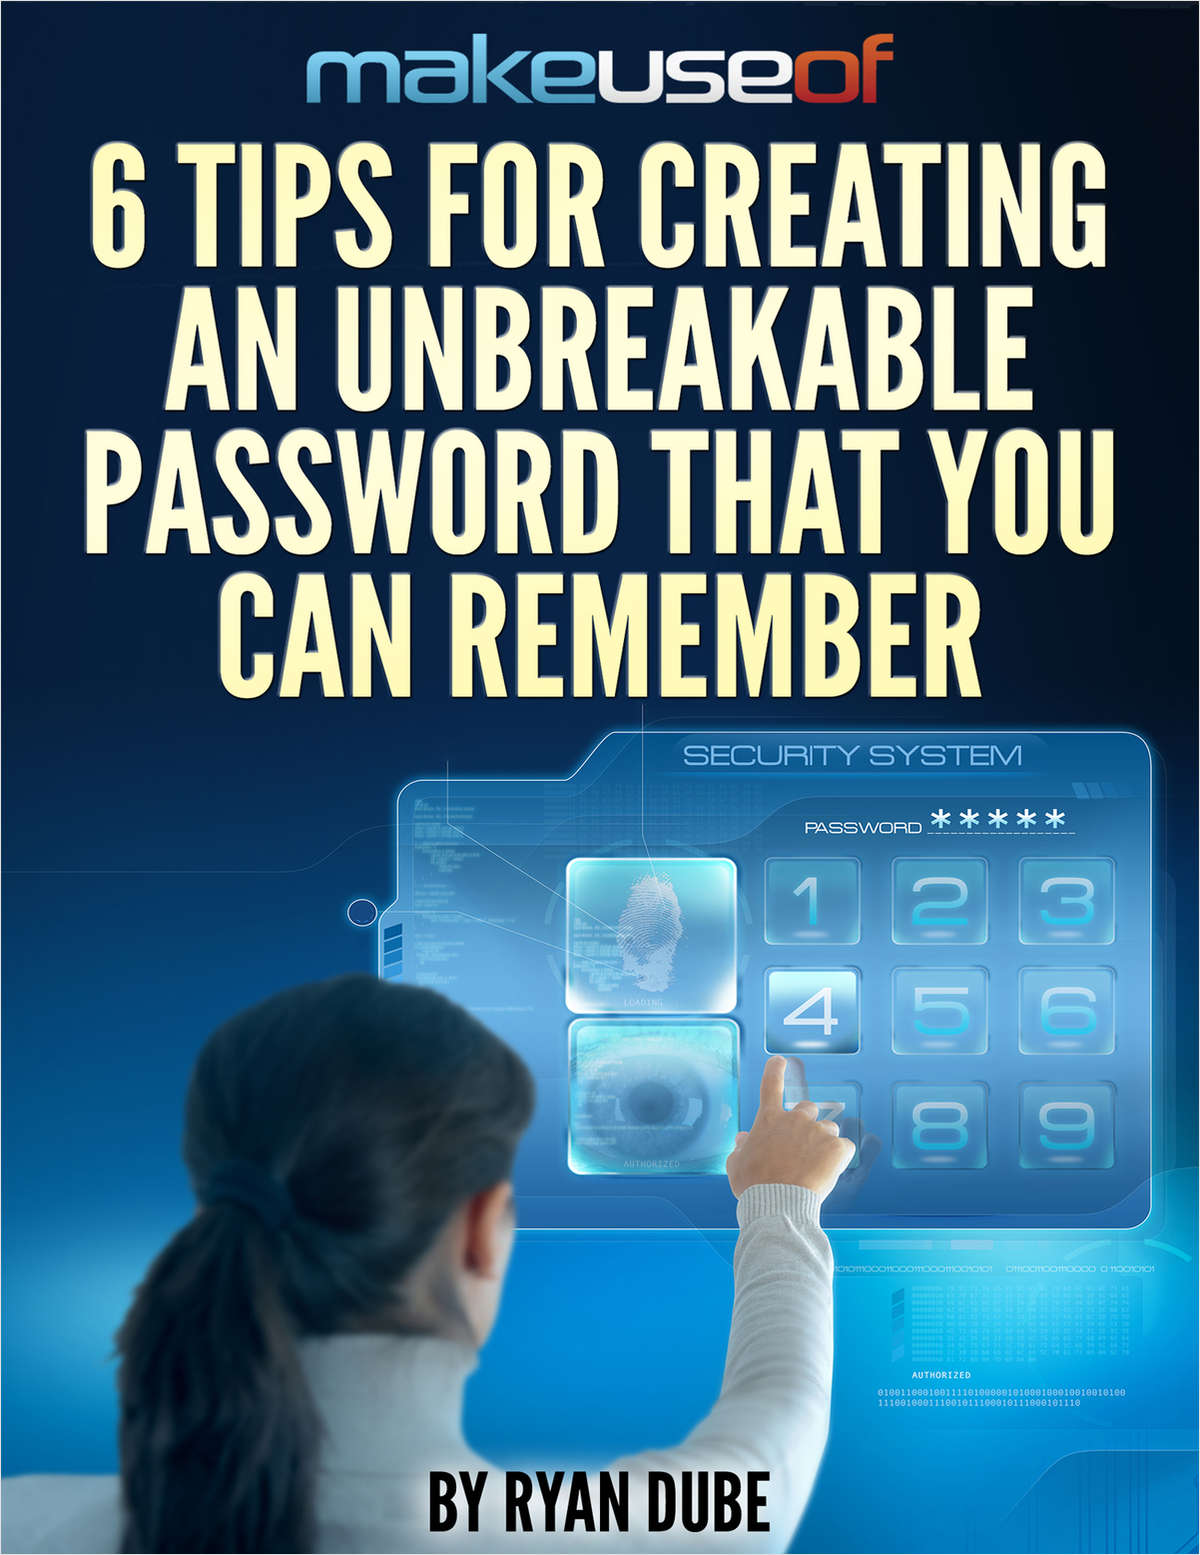 6 Tips For Creating An Unbreakable Password That You Can Remember